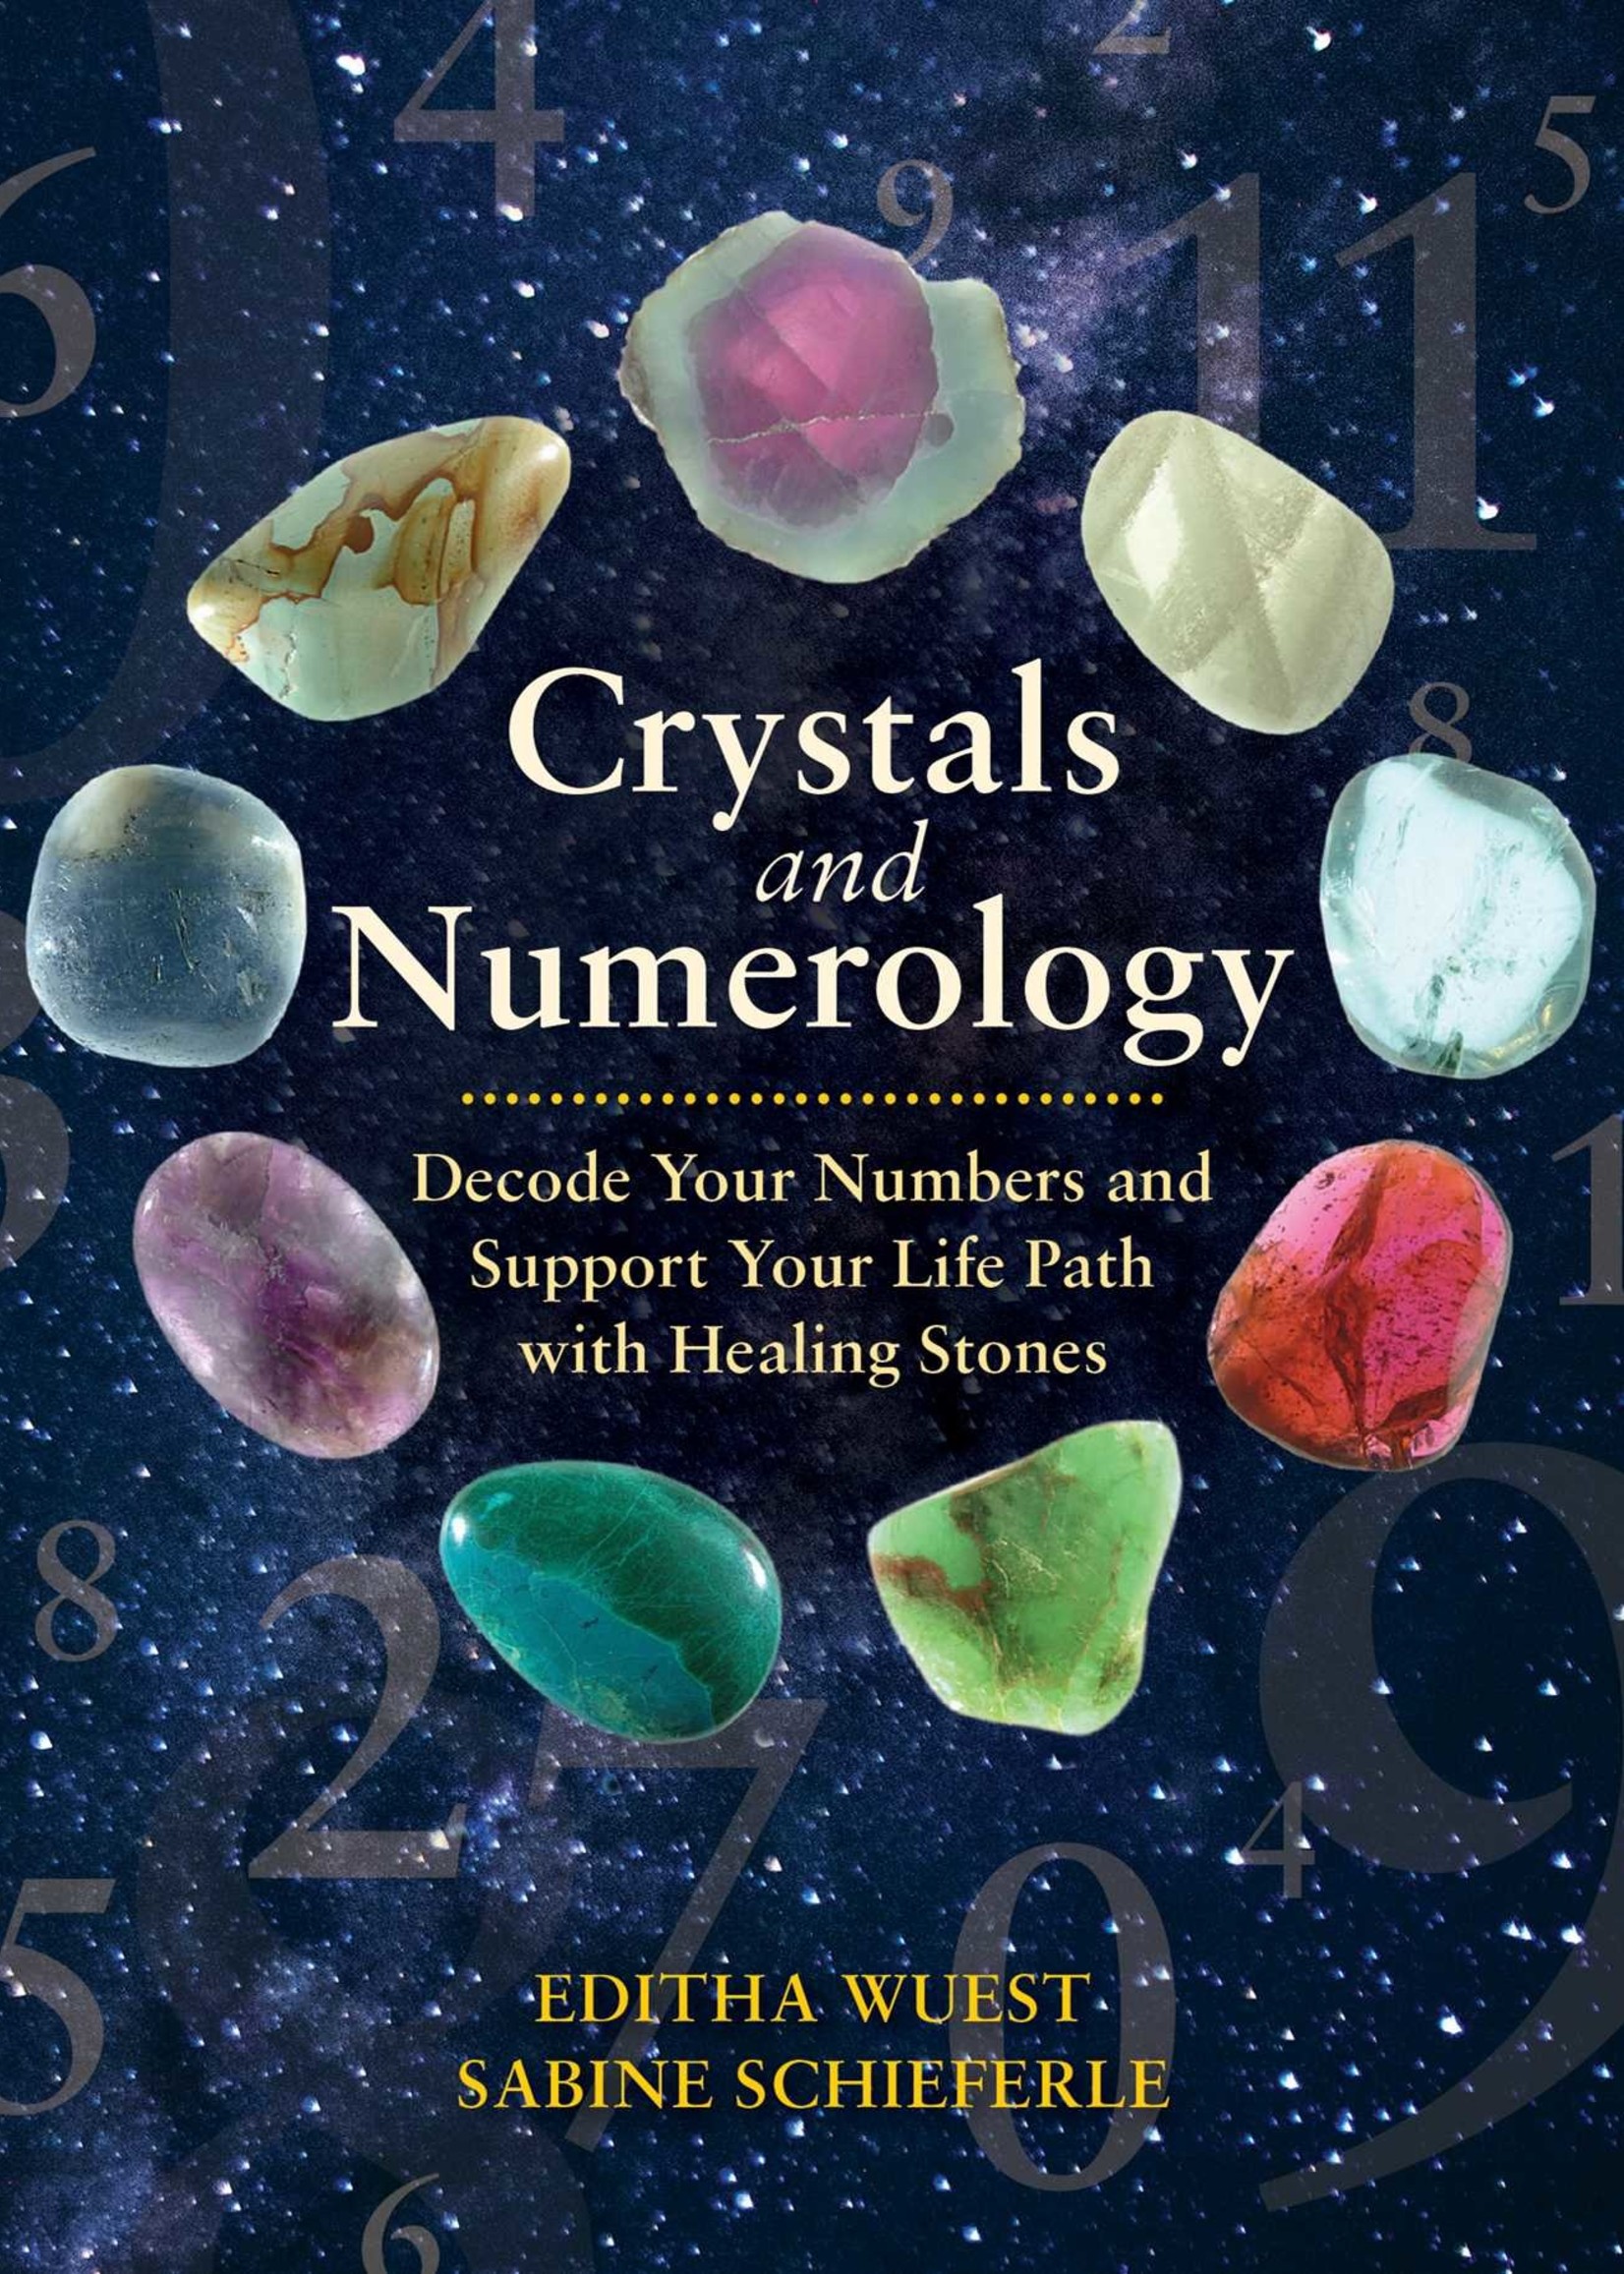 Crystals and Numerology: Decode Your Numbers and Support Your Life Path with Healing Stones by Editha Wuest,  Sabine Schieferle